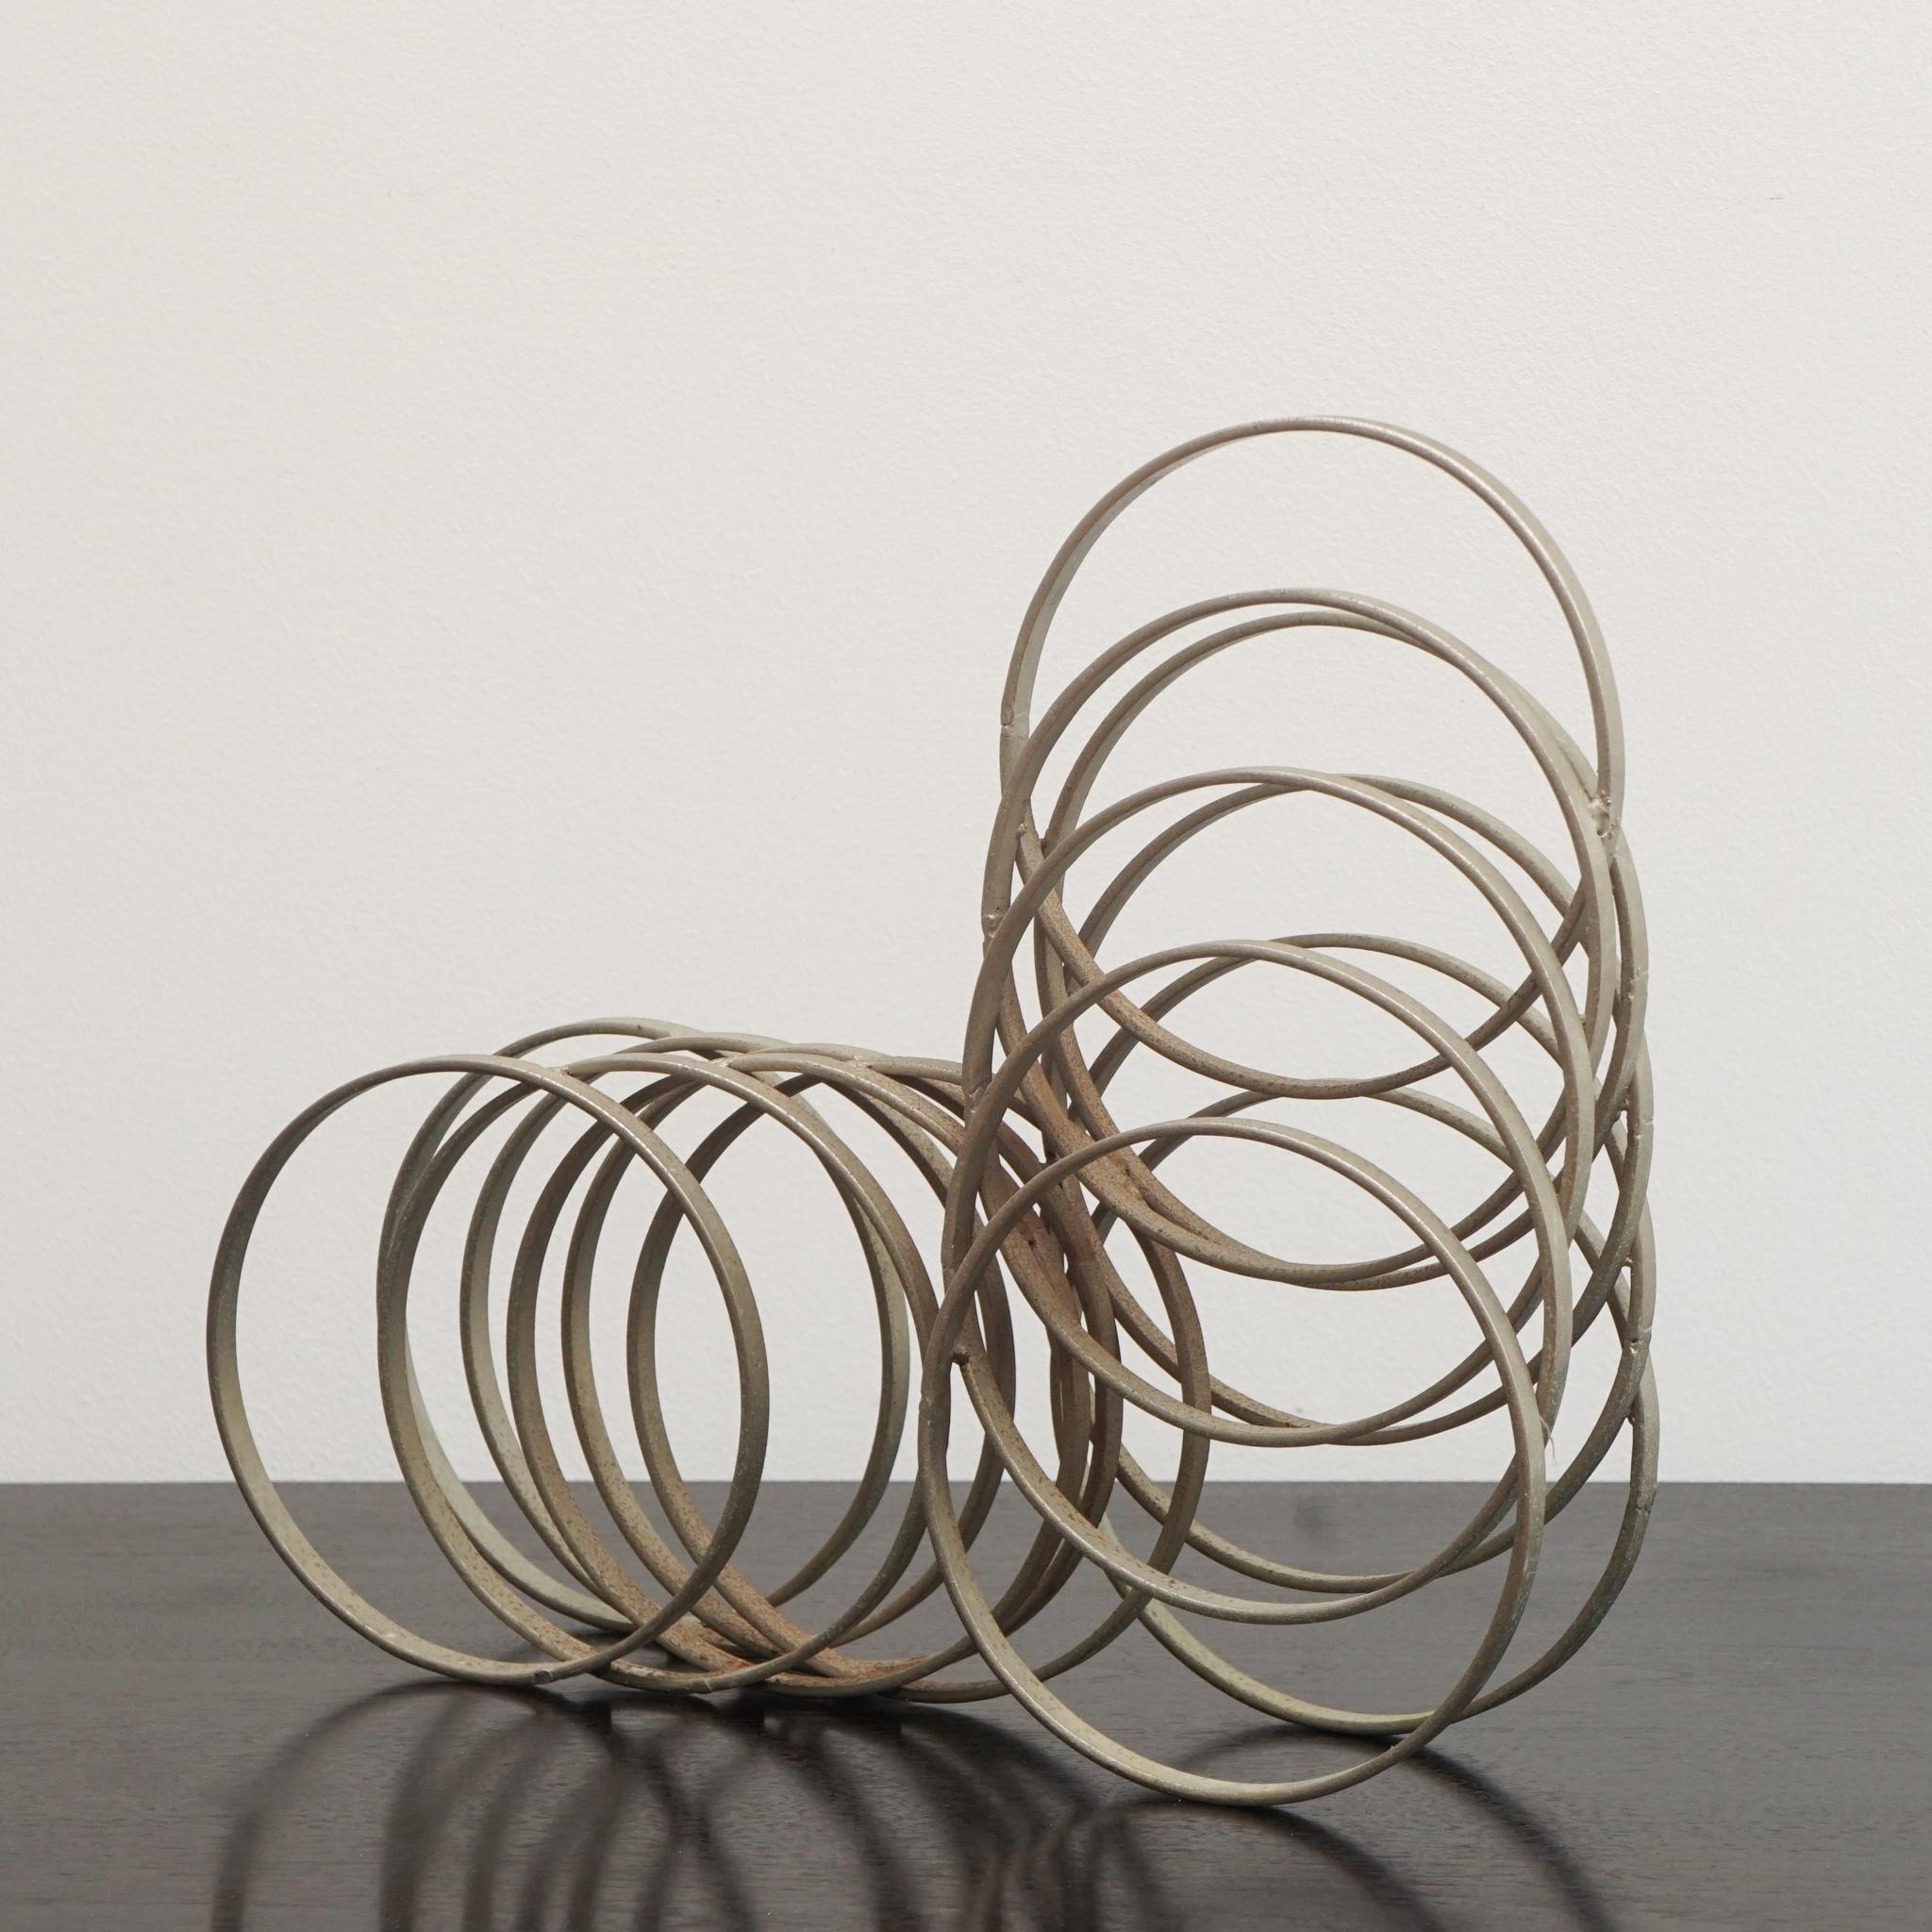 Hand-Crafted Italian Metal Rings Sculpture For Sale